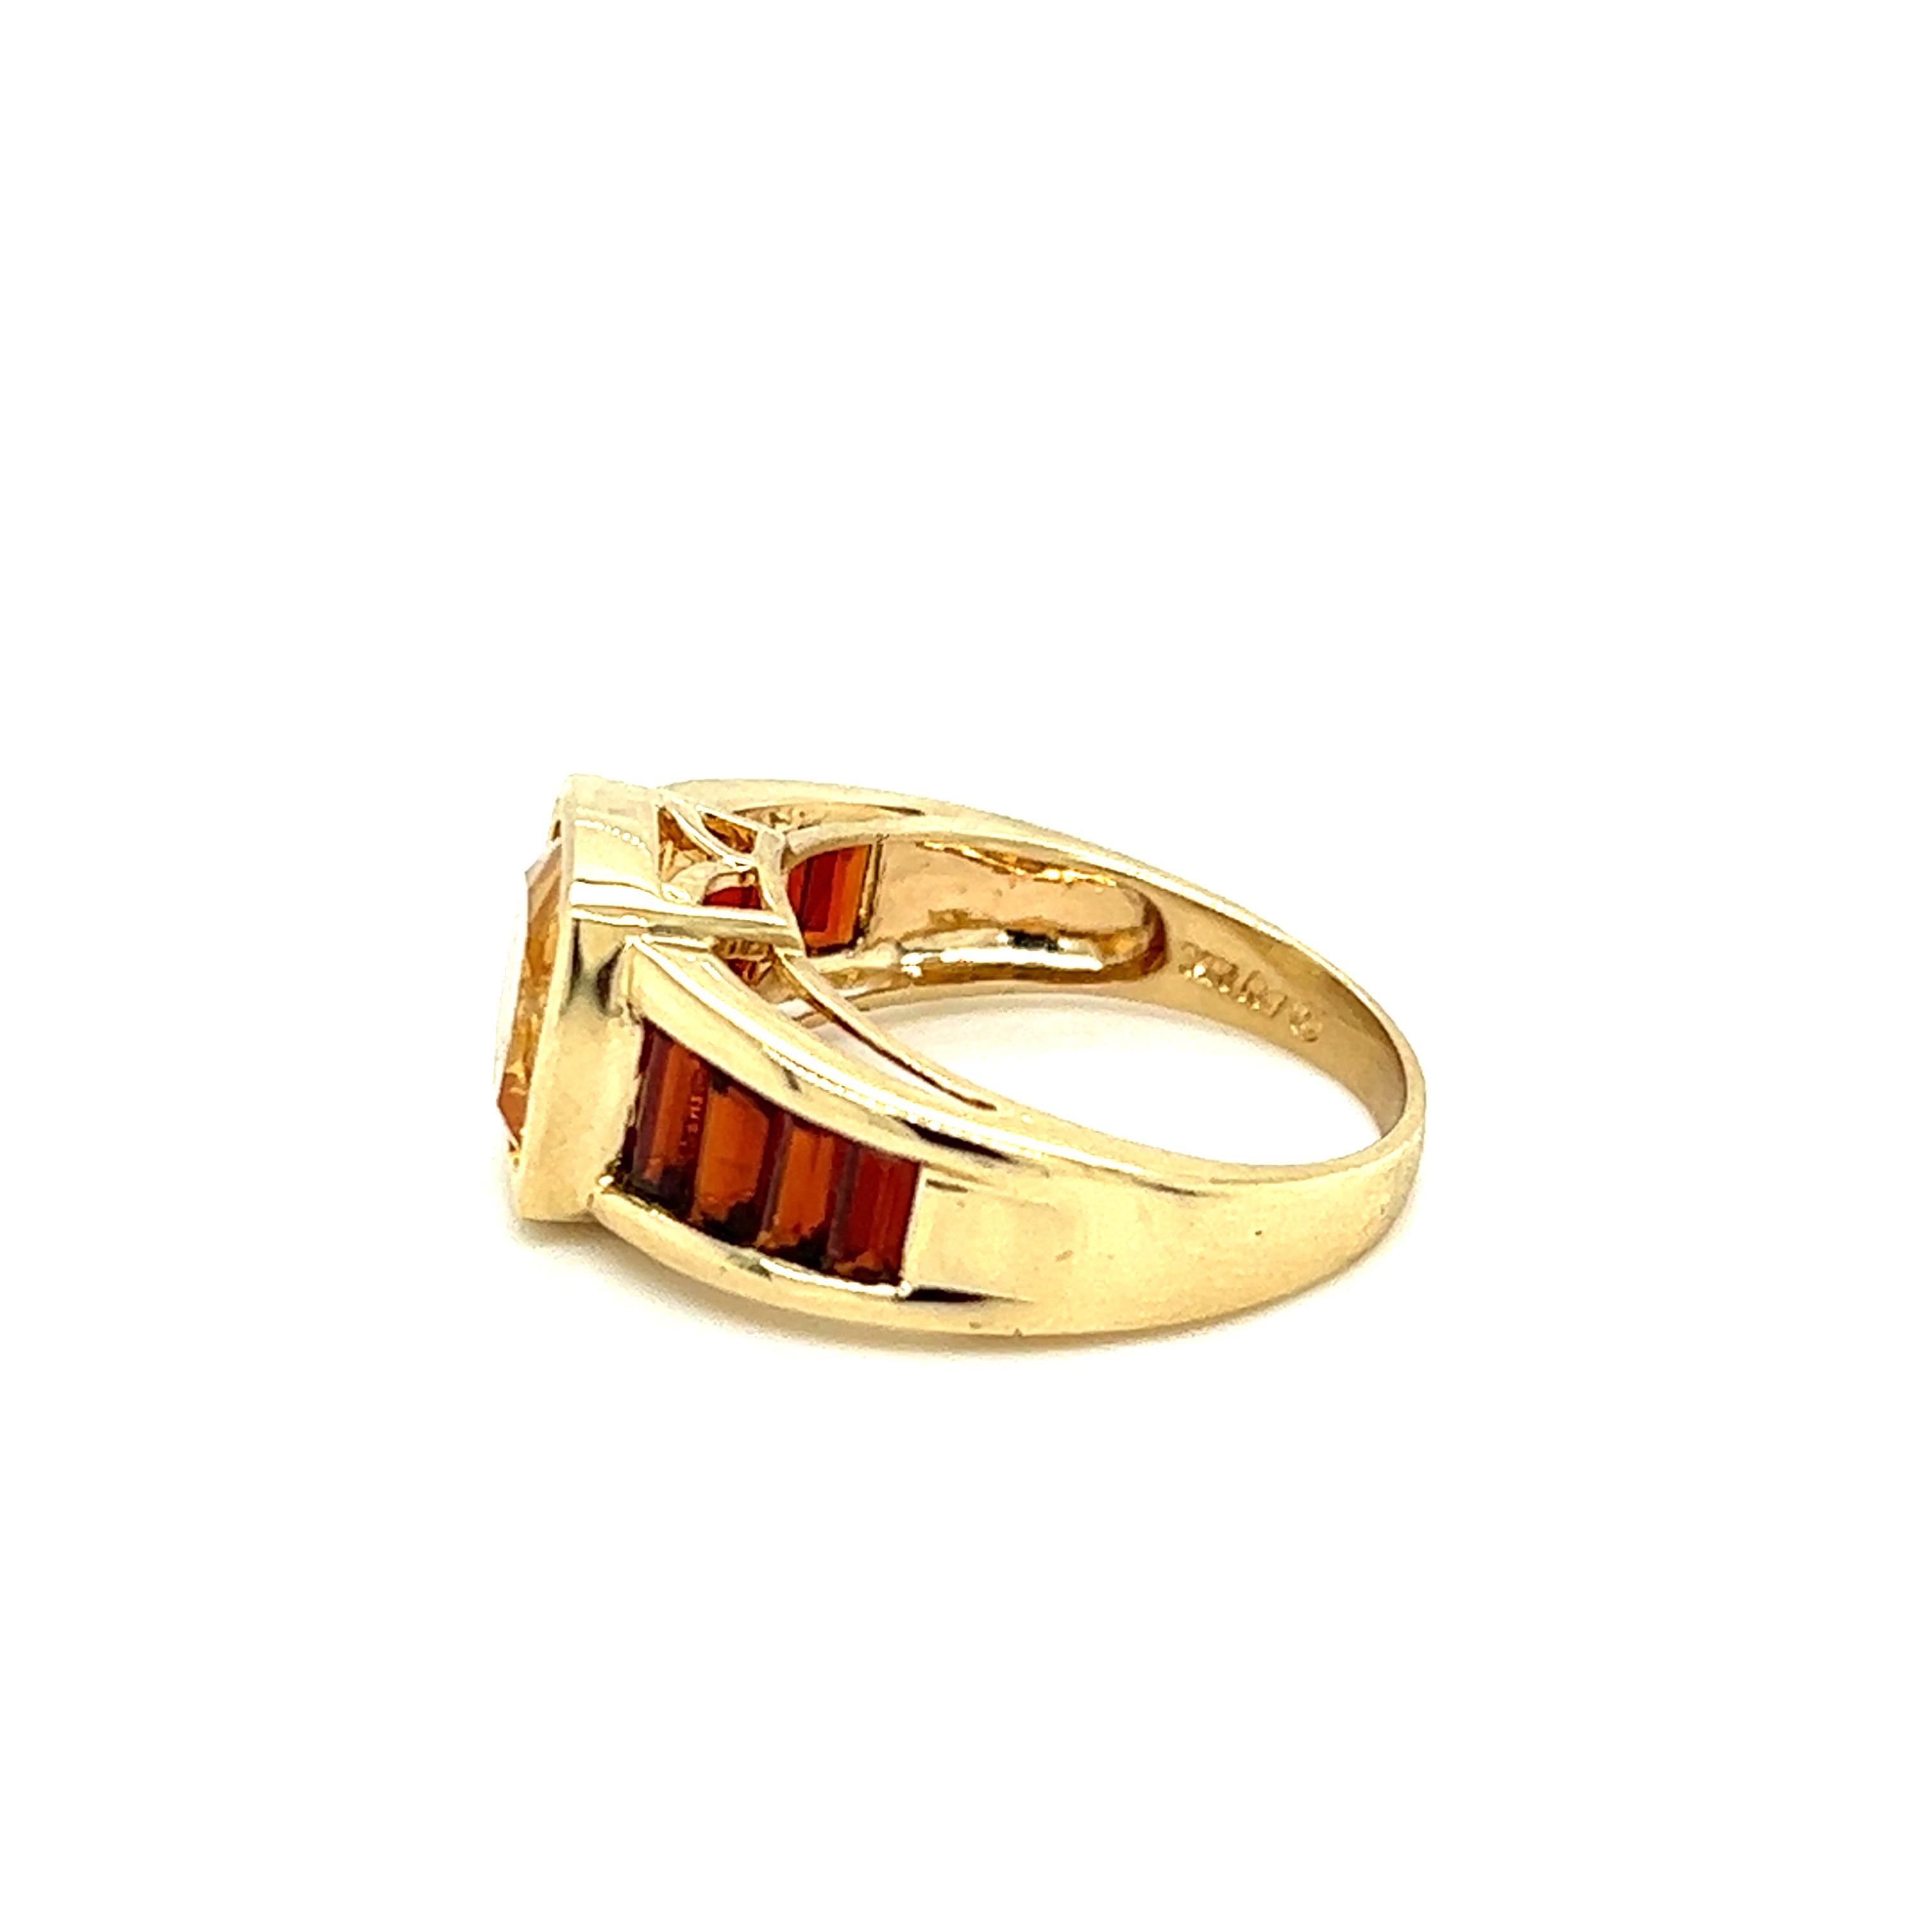 One 14-karat yellow gold (stamped 14K 98) ring set with one 9mm cushion cut citrine, flanked by eight (8) baguette-cut red garnets, ranging in size from 3.5mm to 5.5mm. The ring measures 10.70mm at the top of the ring and tapers to 2.90mm at the